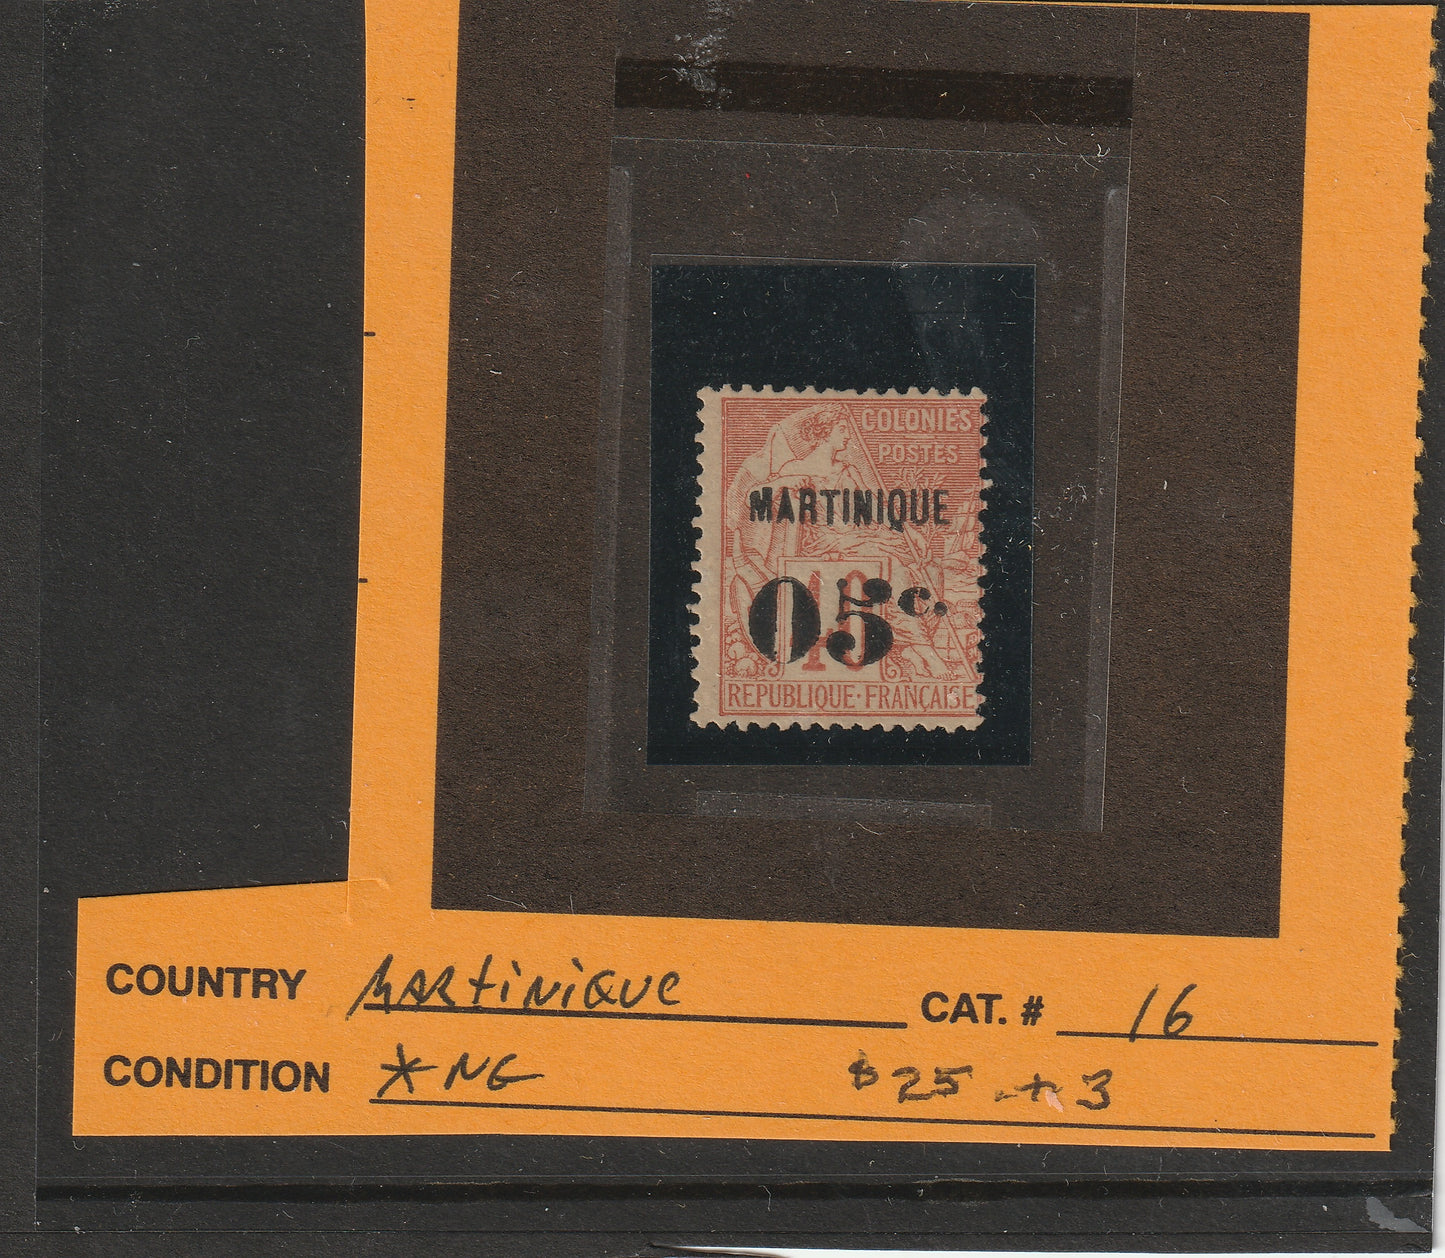 Martinique 05c Postage Stamp - *NG Condition